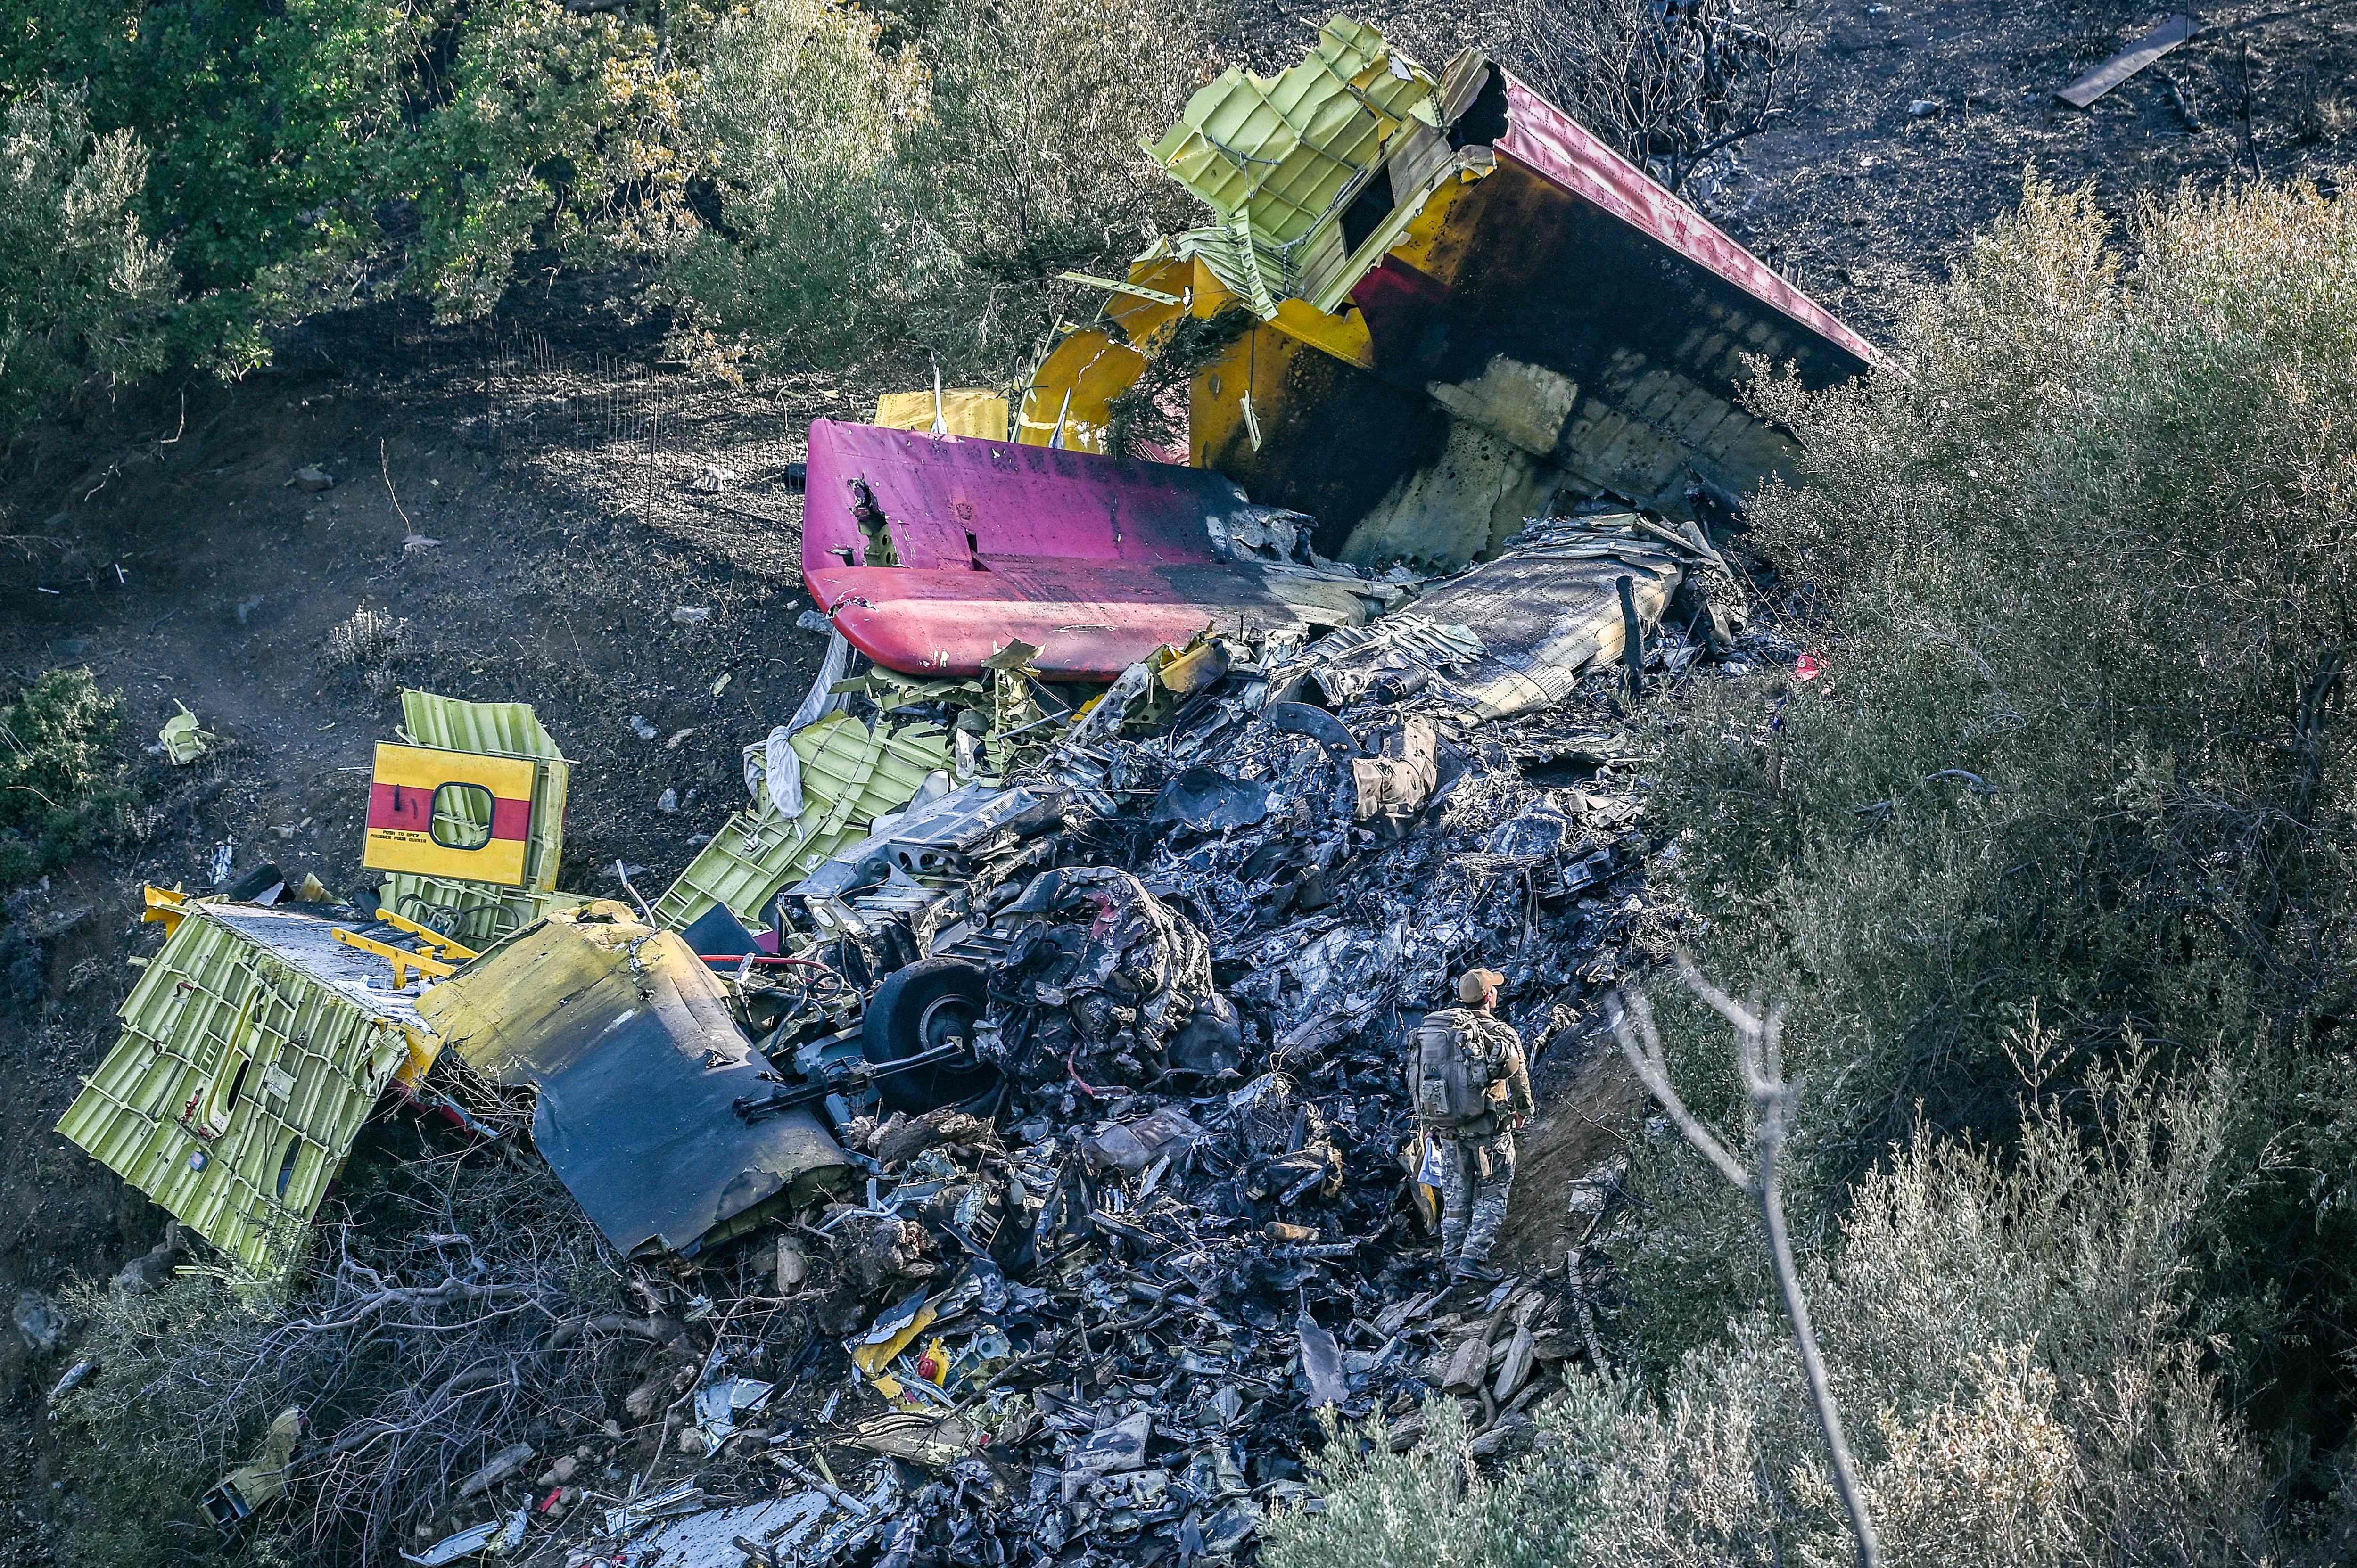 Debris from a Canadair CL-215 firefighting aircraft, which crashed while fighting a wildfire in Karystos